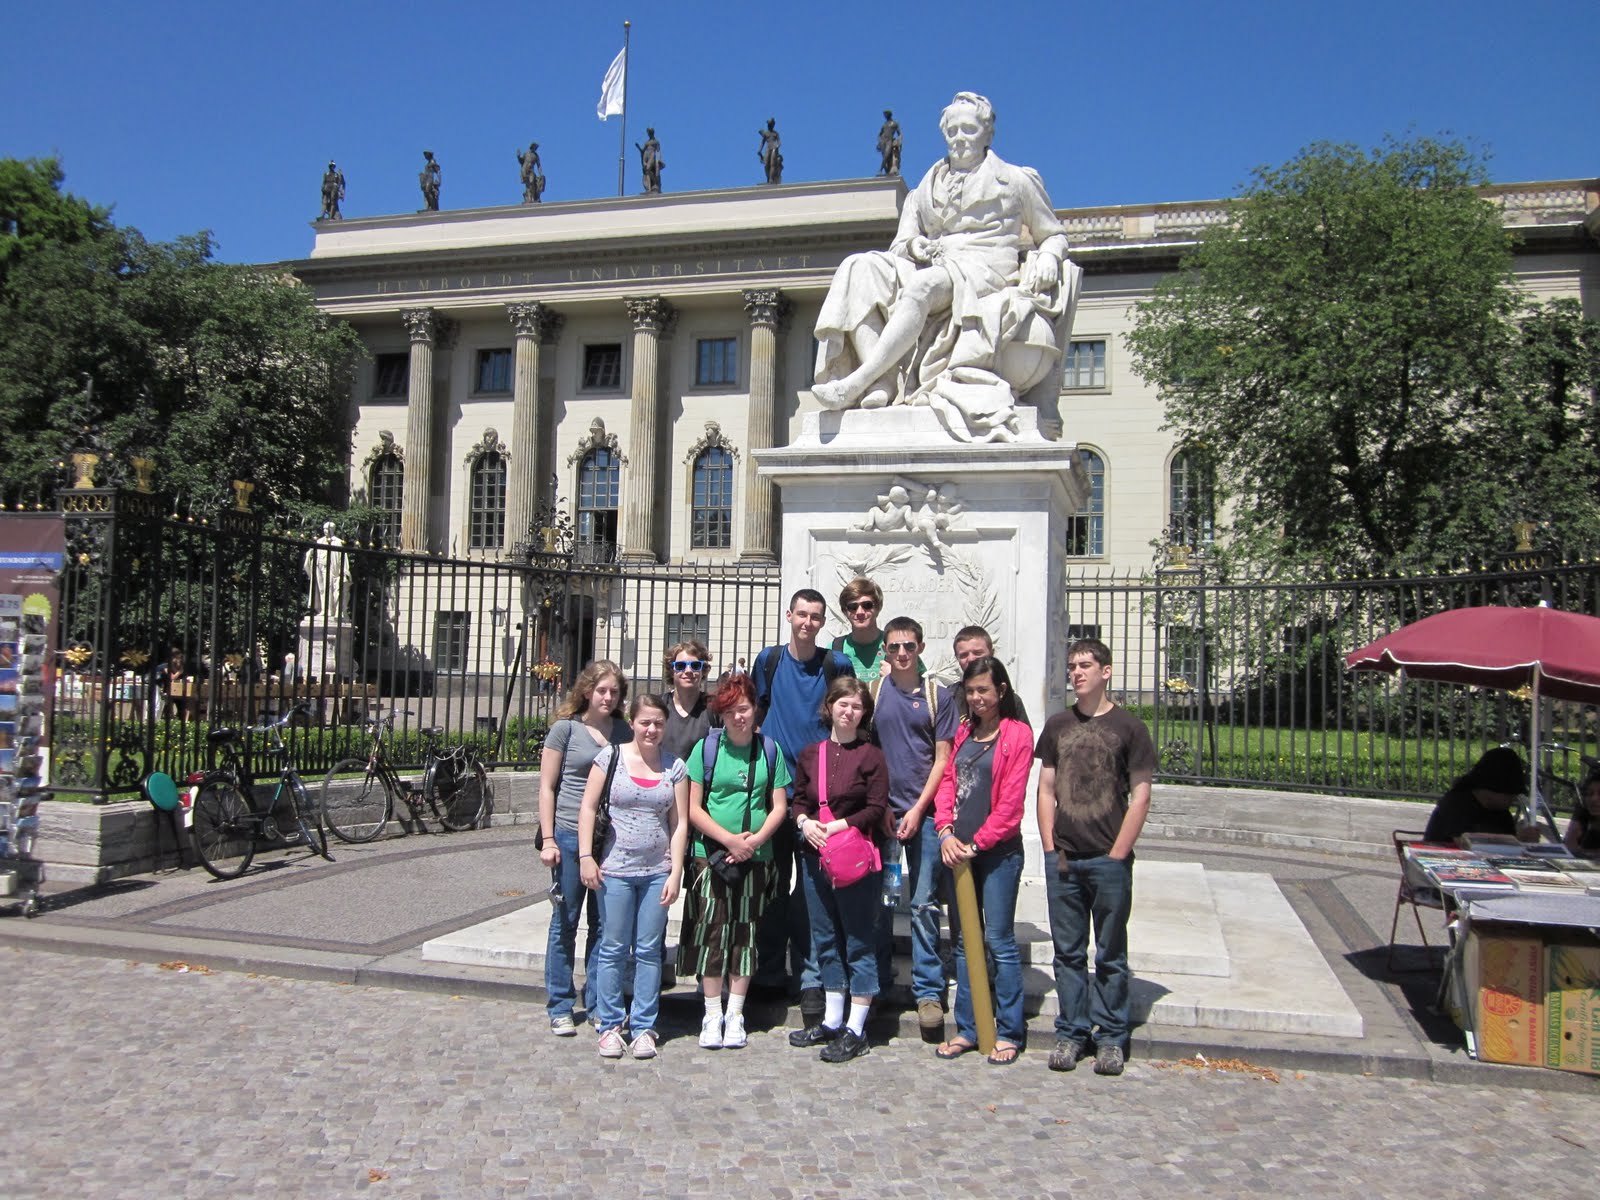 ... bhs group at the entrance to humboldt universitÃ¤t berlin germany